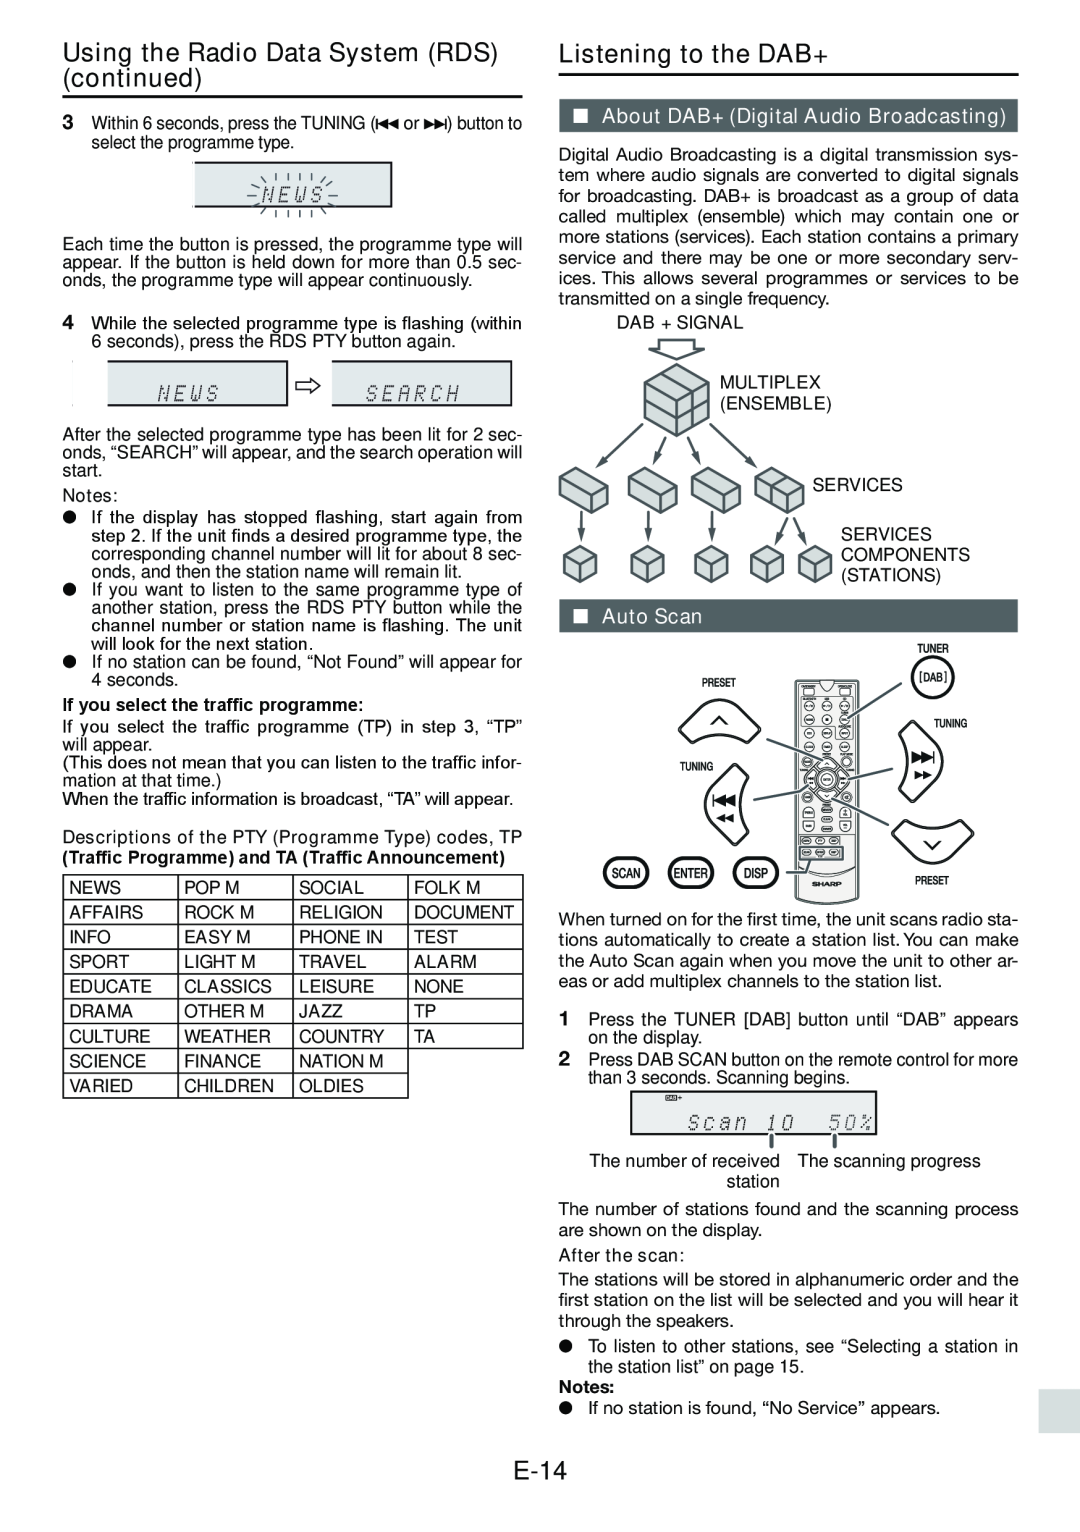 Sharp XL-DAB102DH operation manual Using the Radio Data System RDS continued, Listening to the DAB+, E-14, Auto Scan 